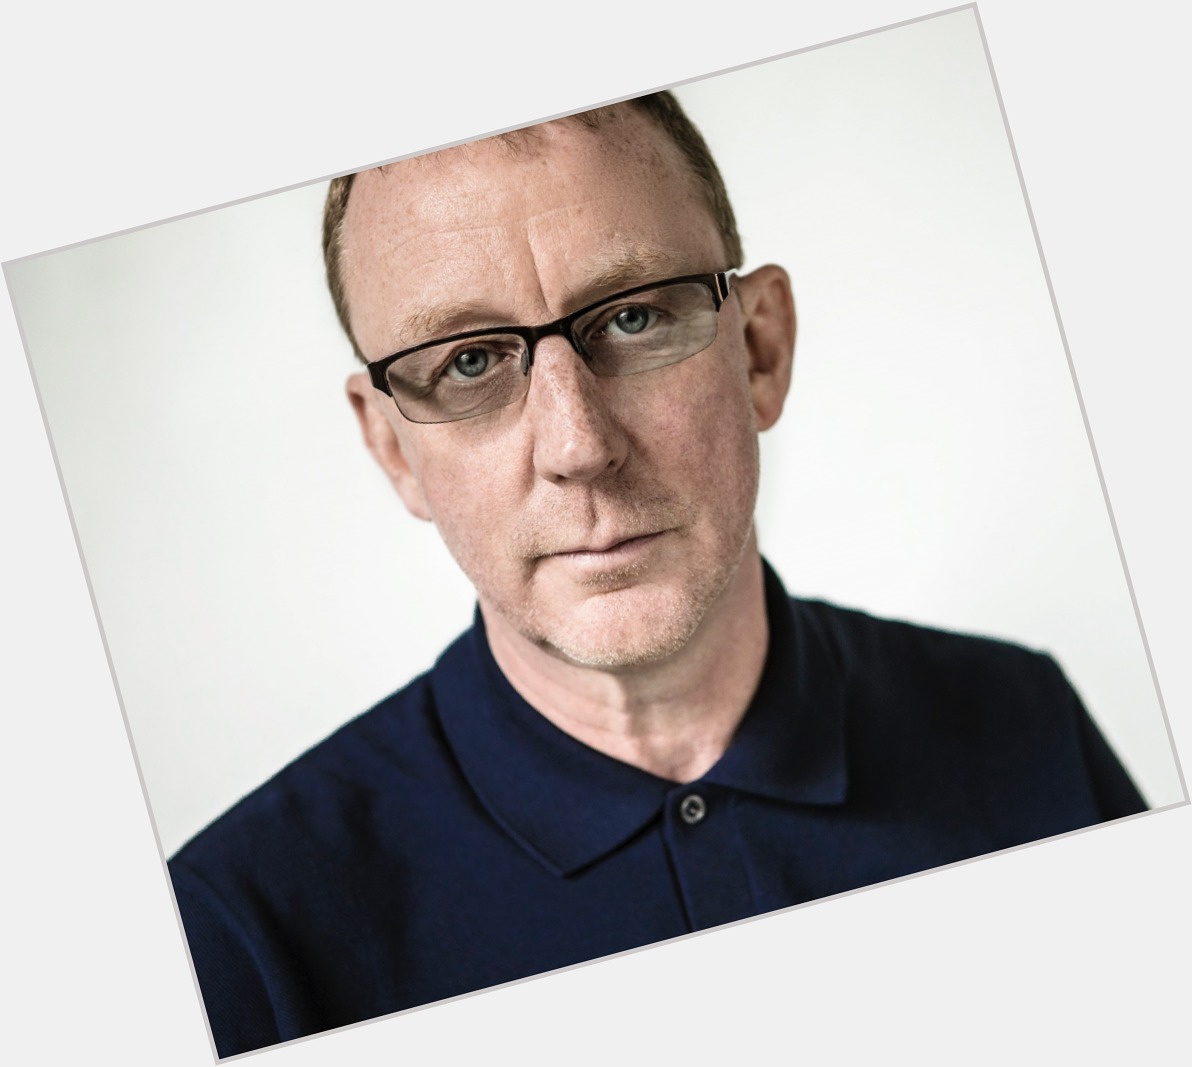 Http://fanpagepress.net/m/D/Dave Rowntree New Pic 1